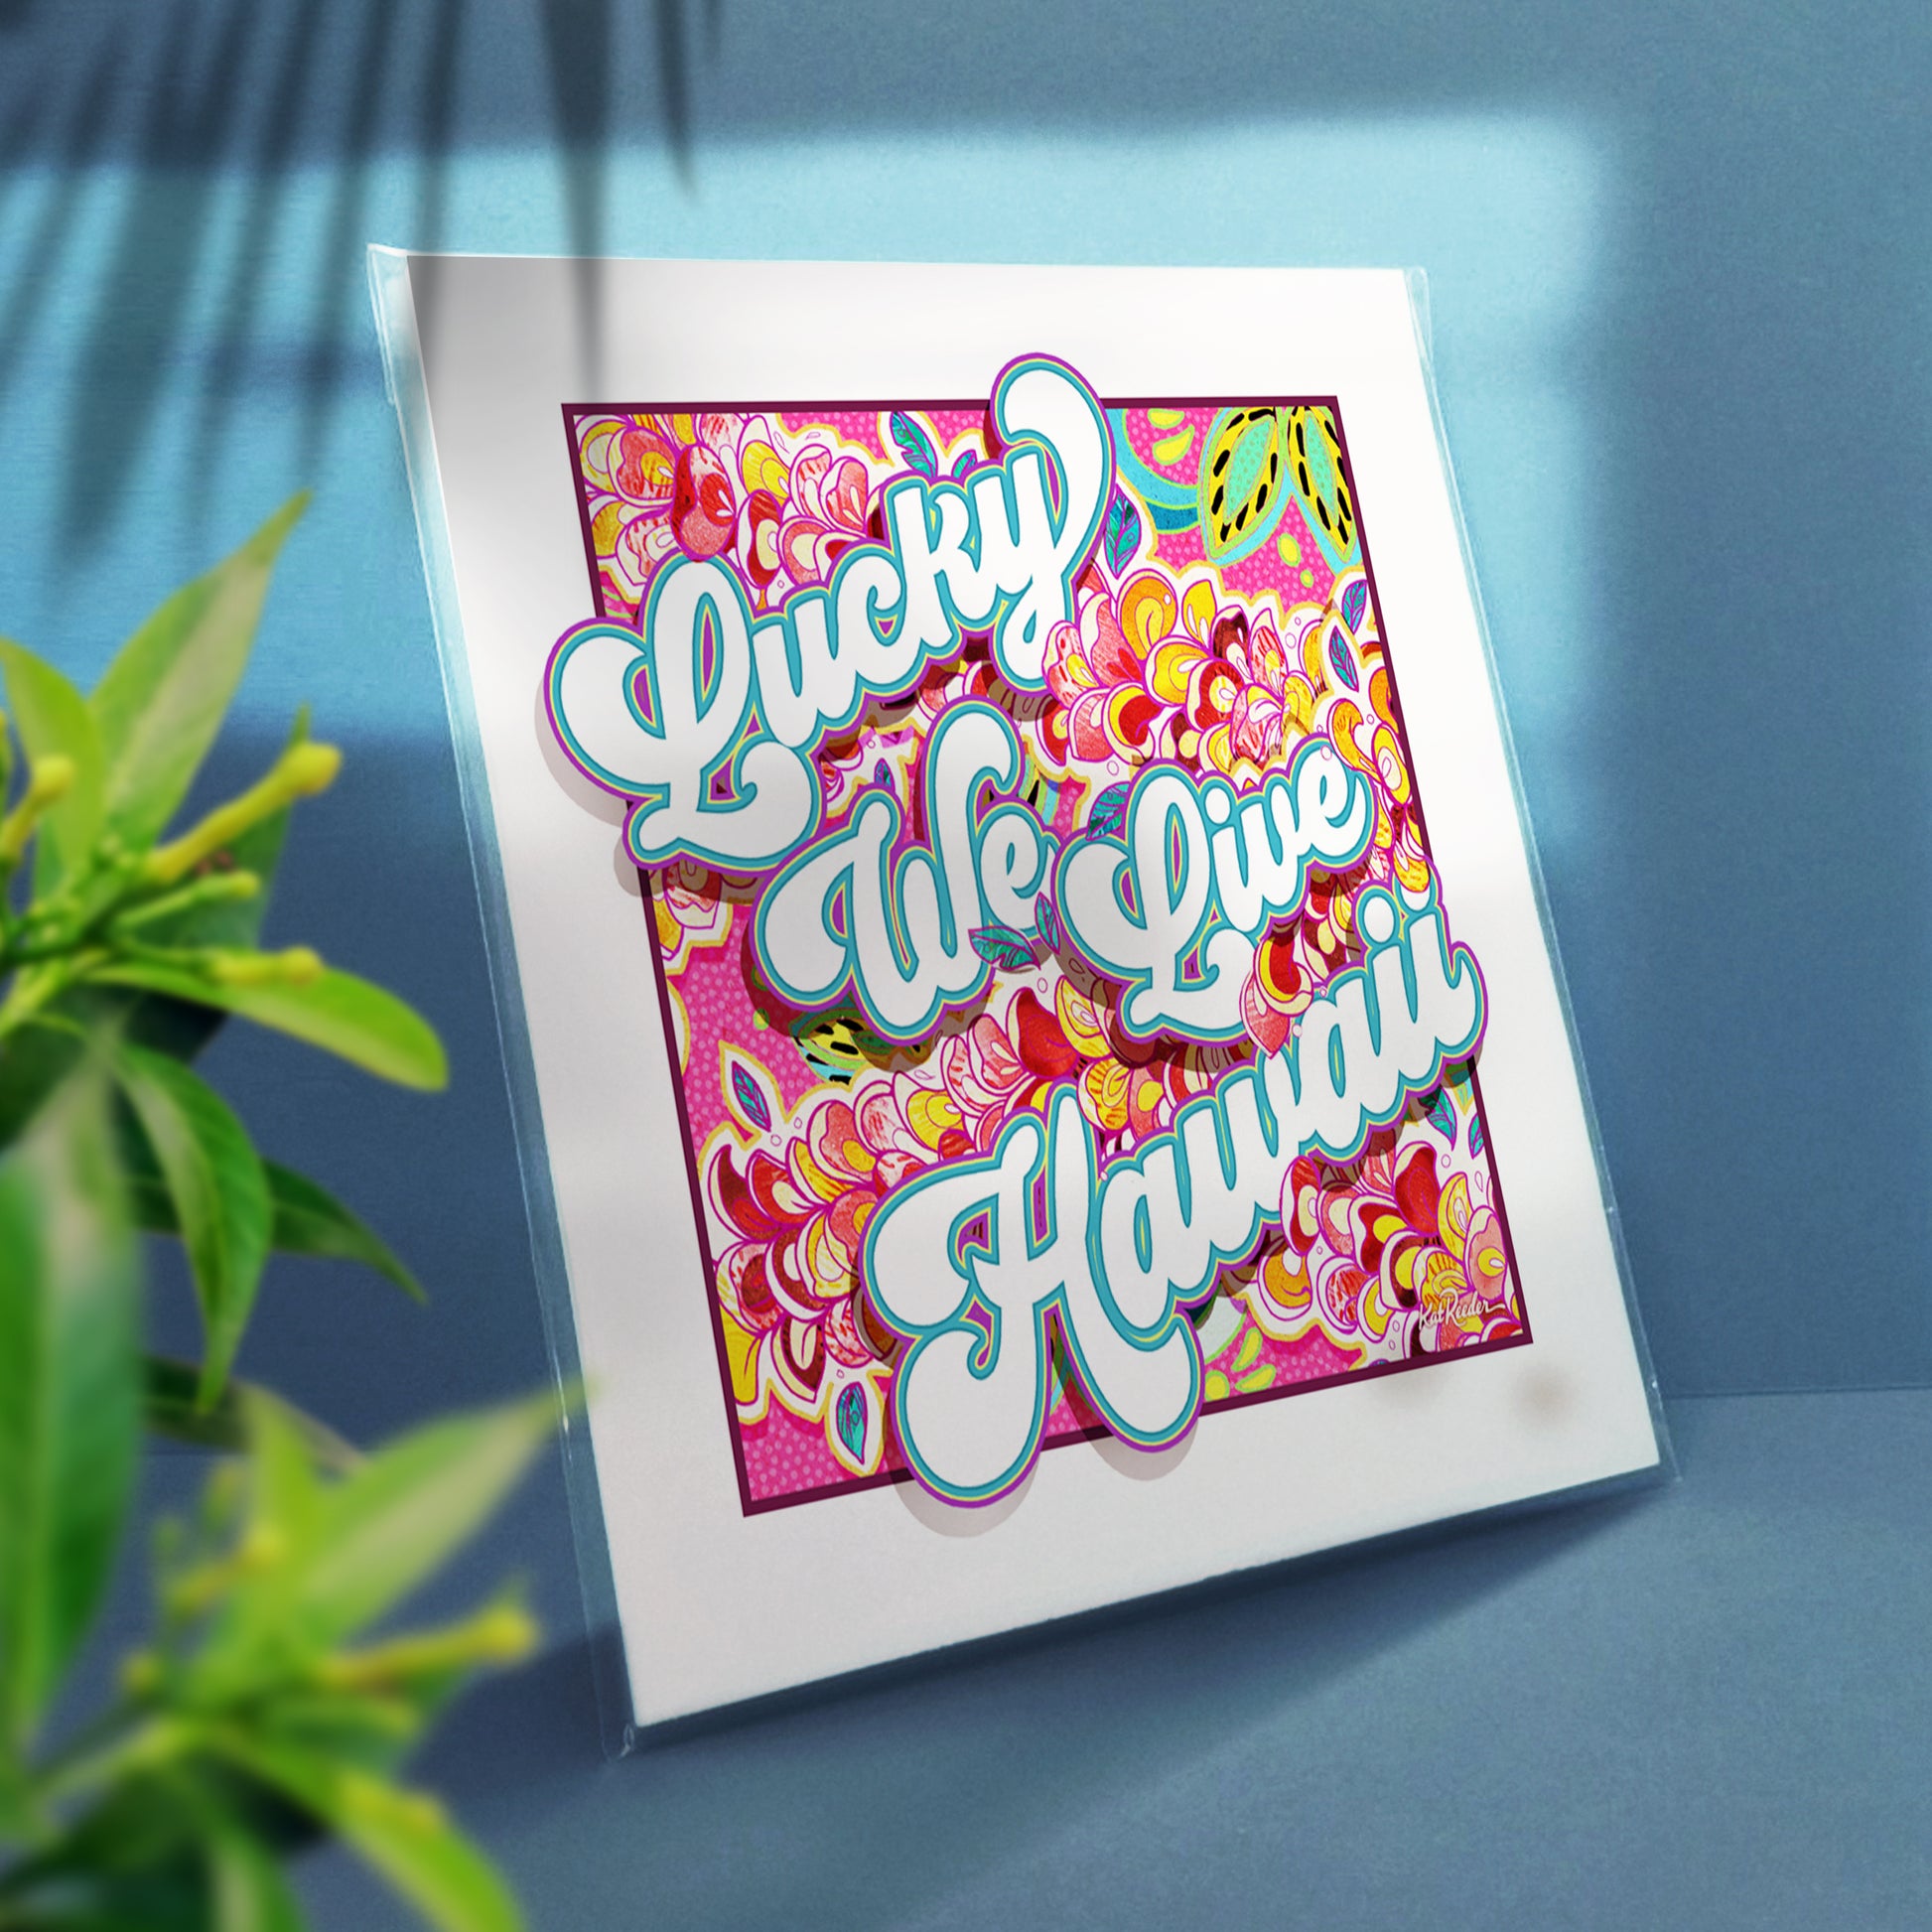 3/4 view of a square print of an sign that reads  "lucky we live hawaii", featuring bubbly fonts and floral lei patterns